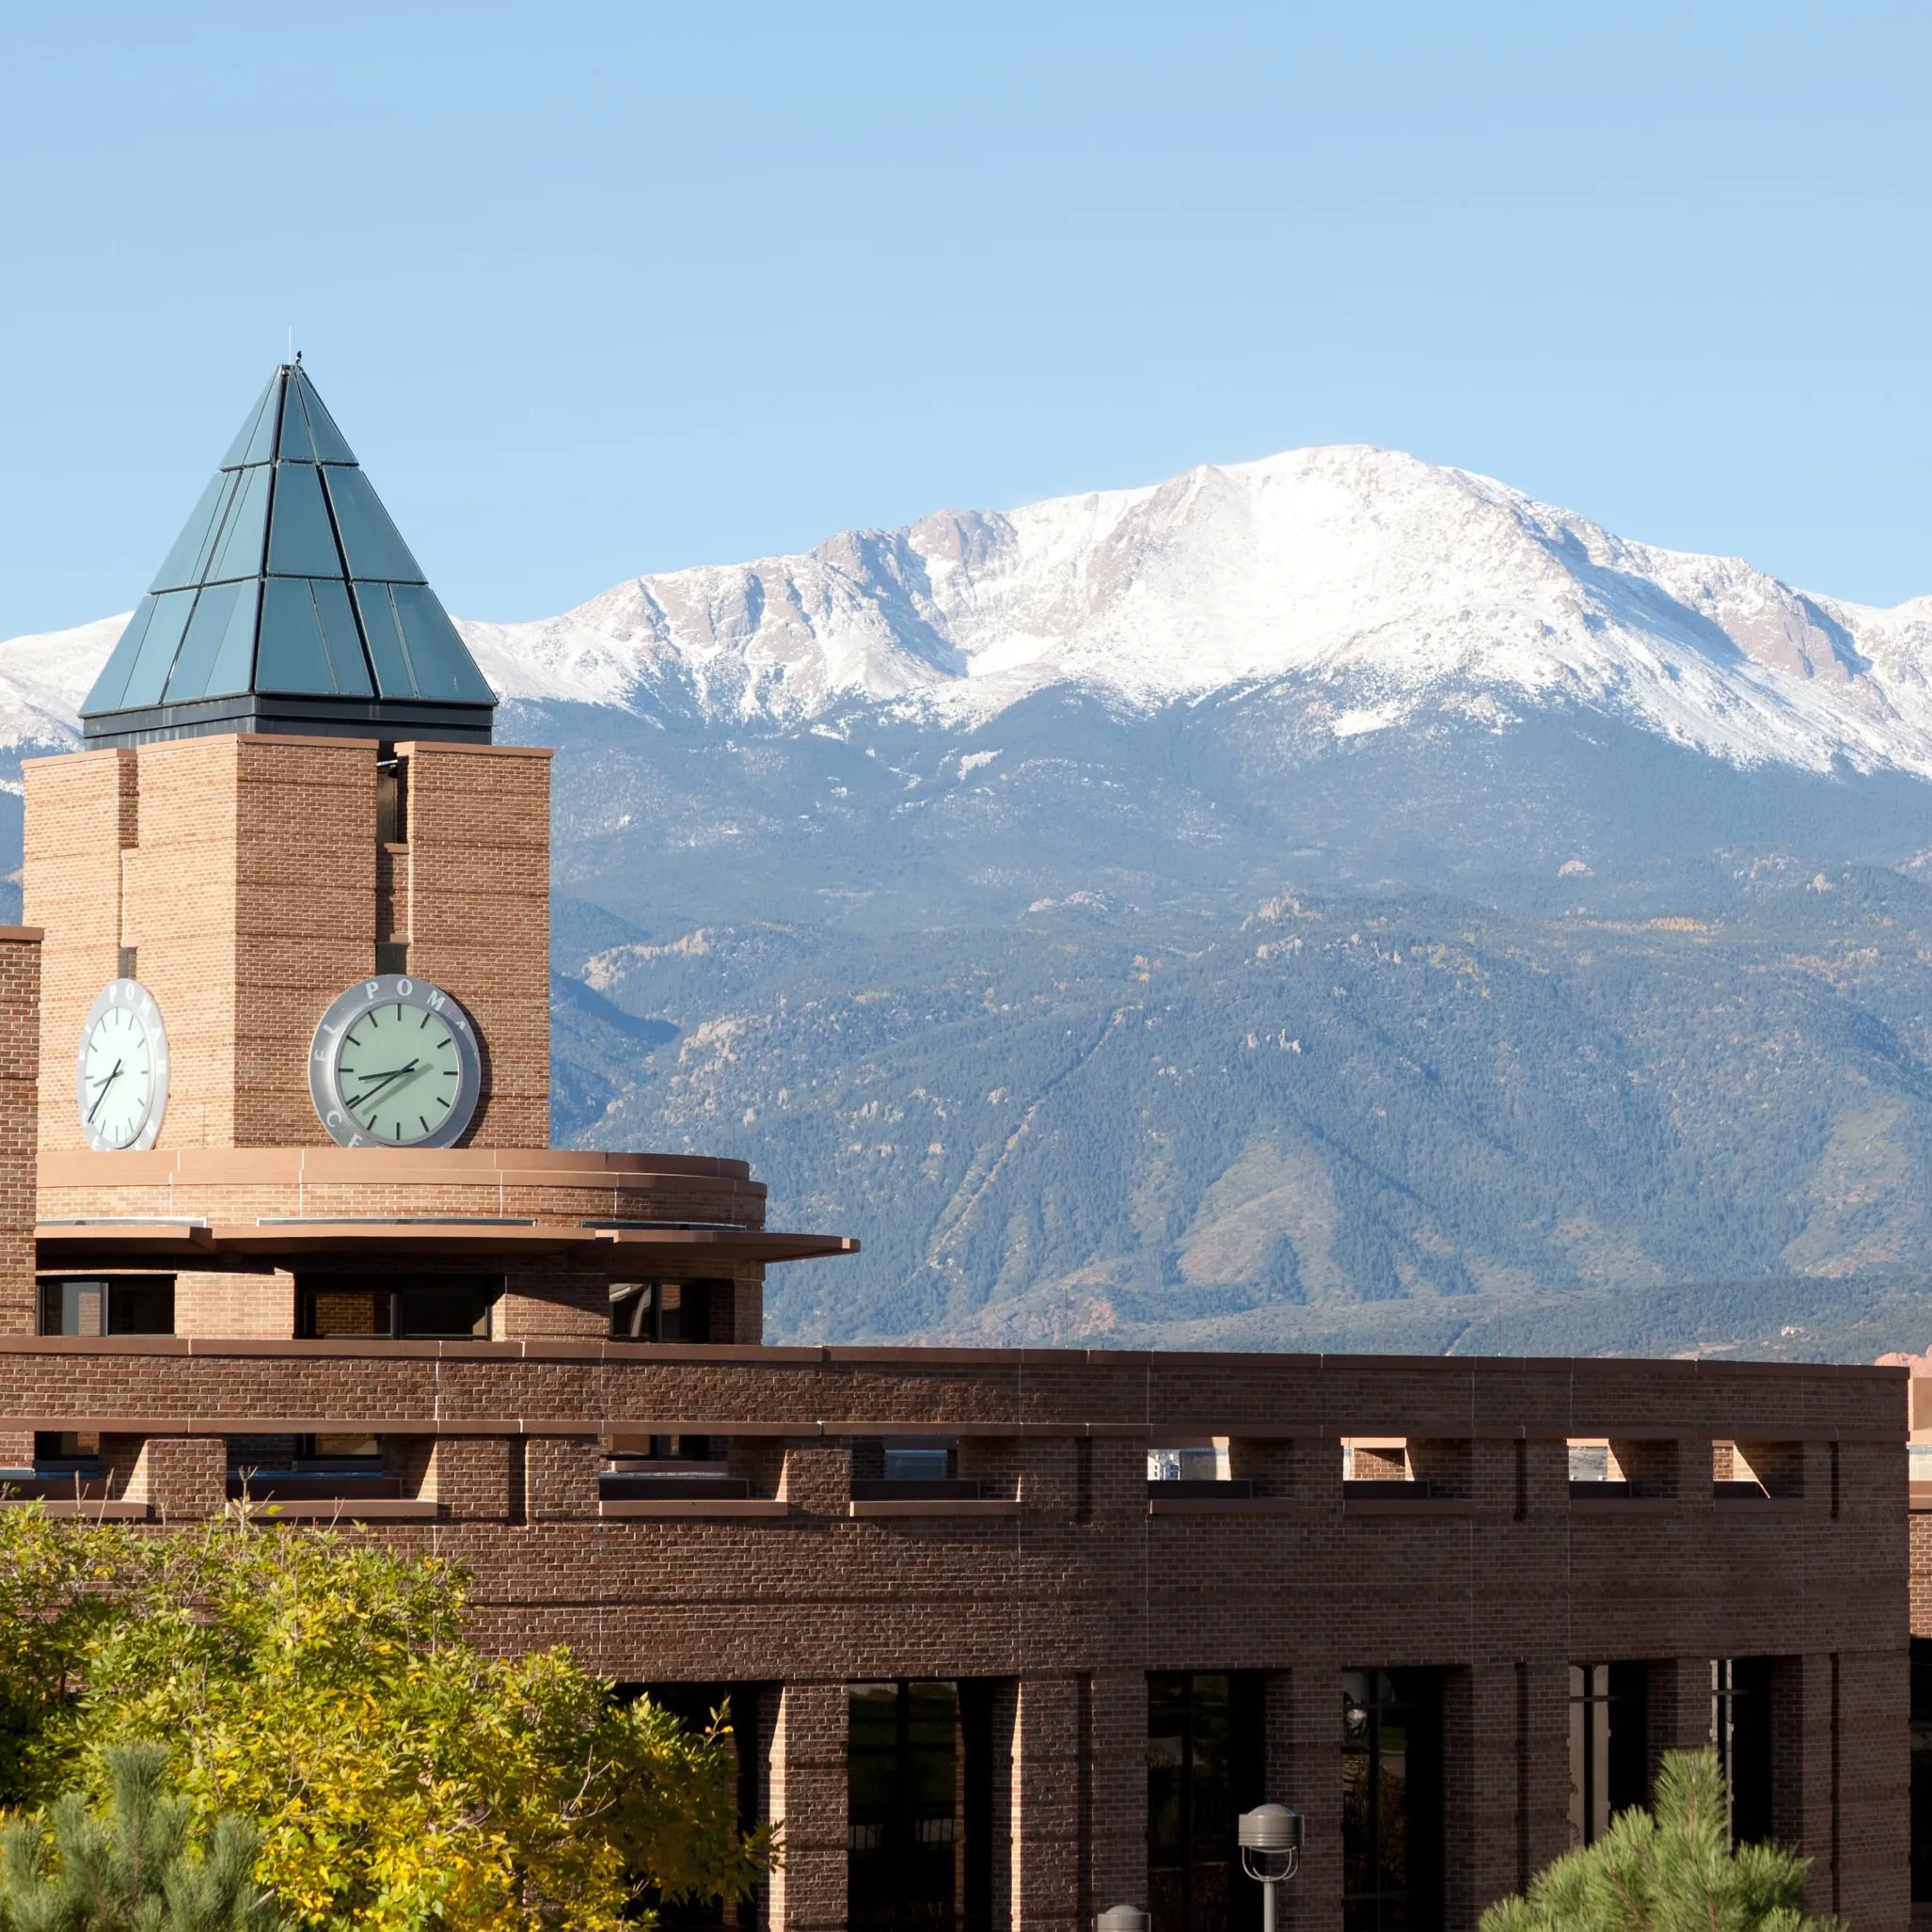 Pikes Peak and Kraemer Family Library